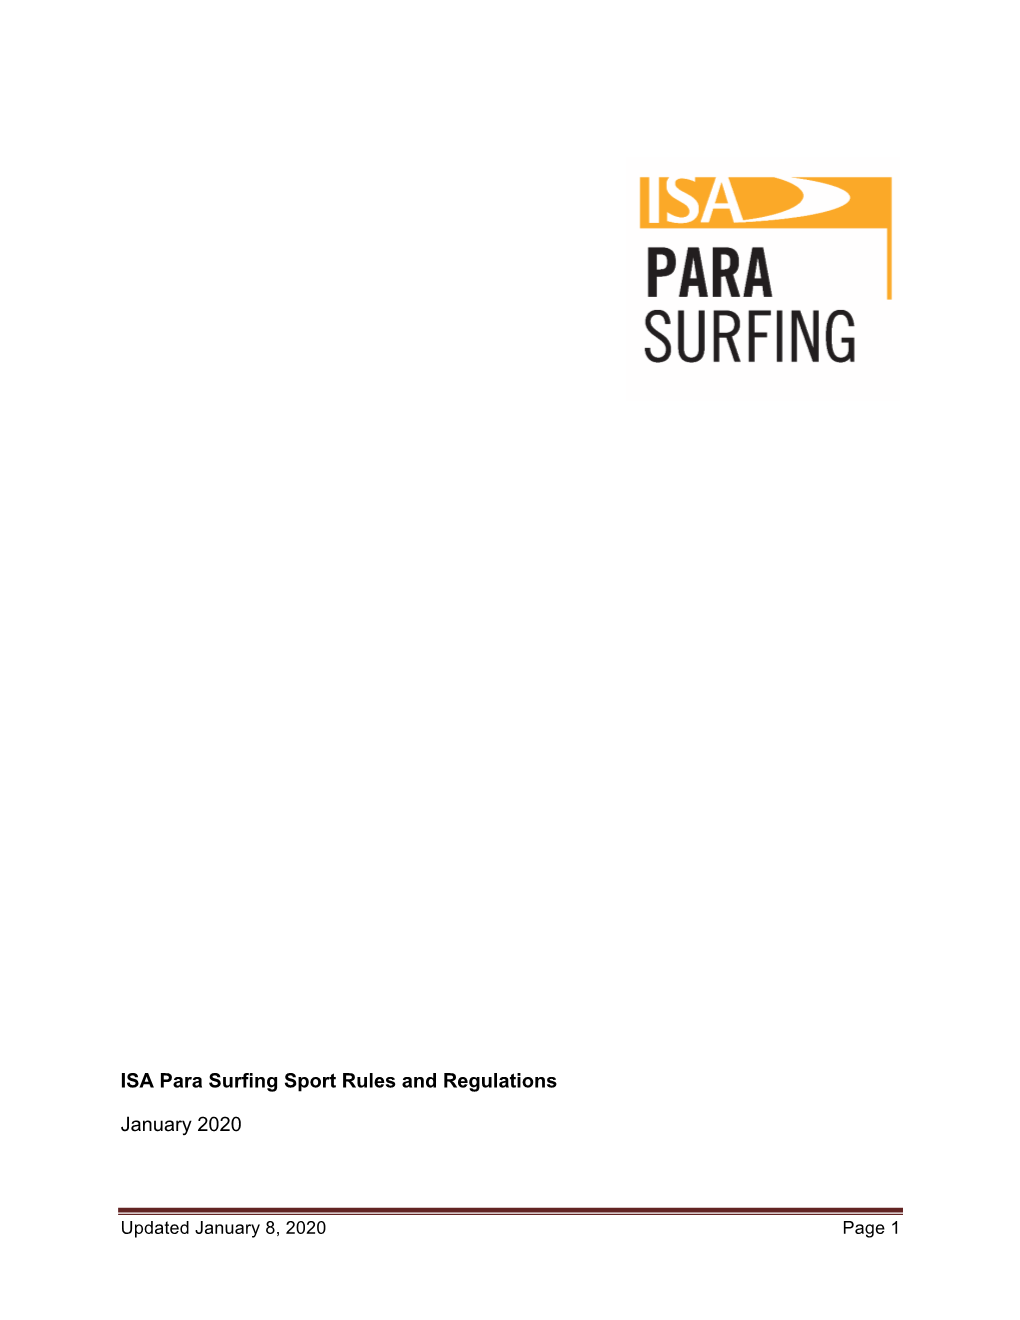 ISA Para Surfing Sport Rules and Regulations January 2020